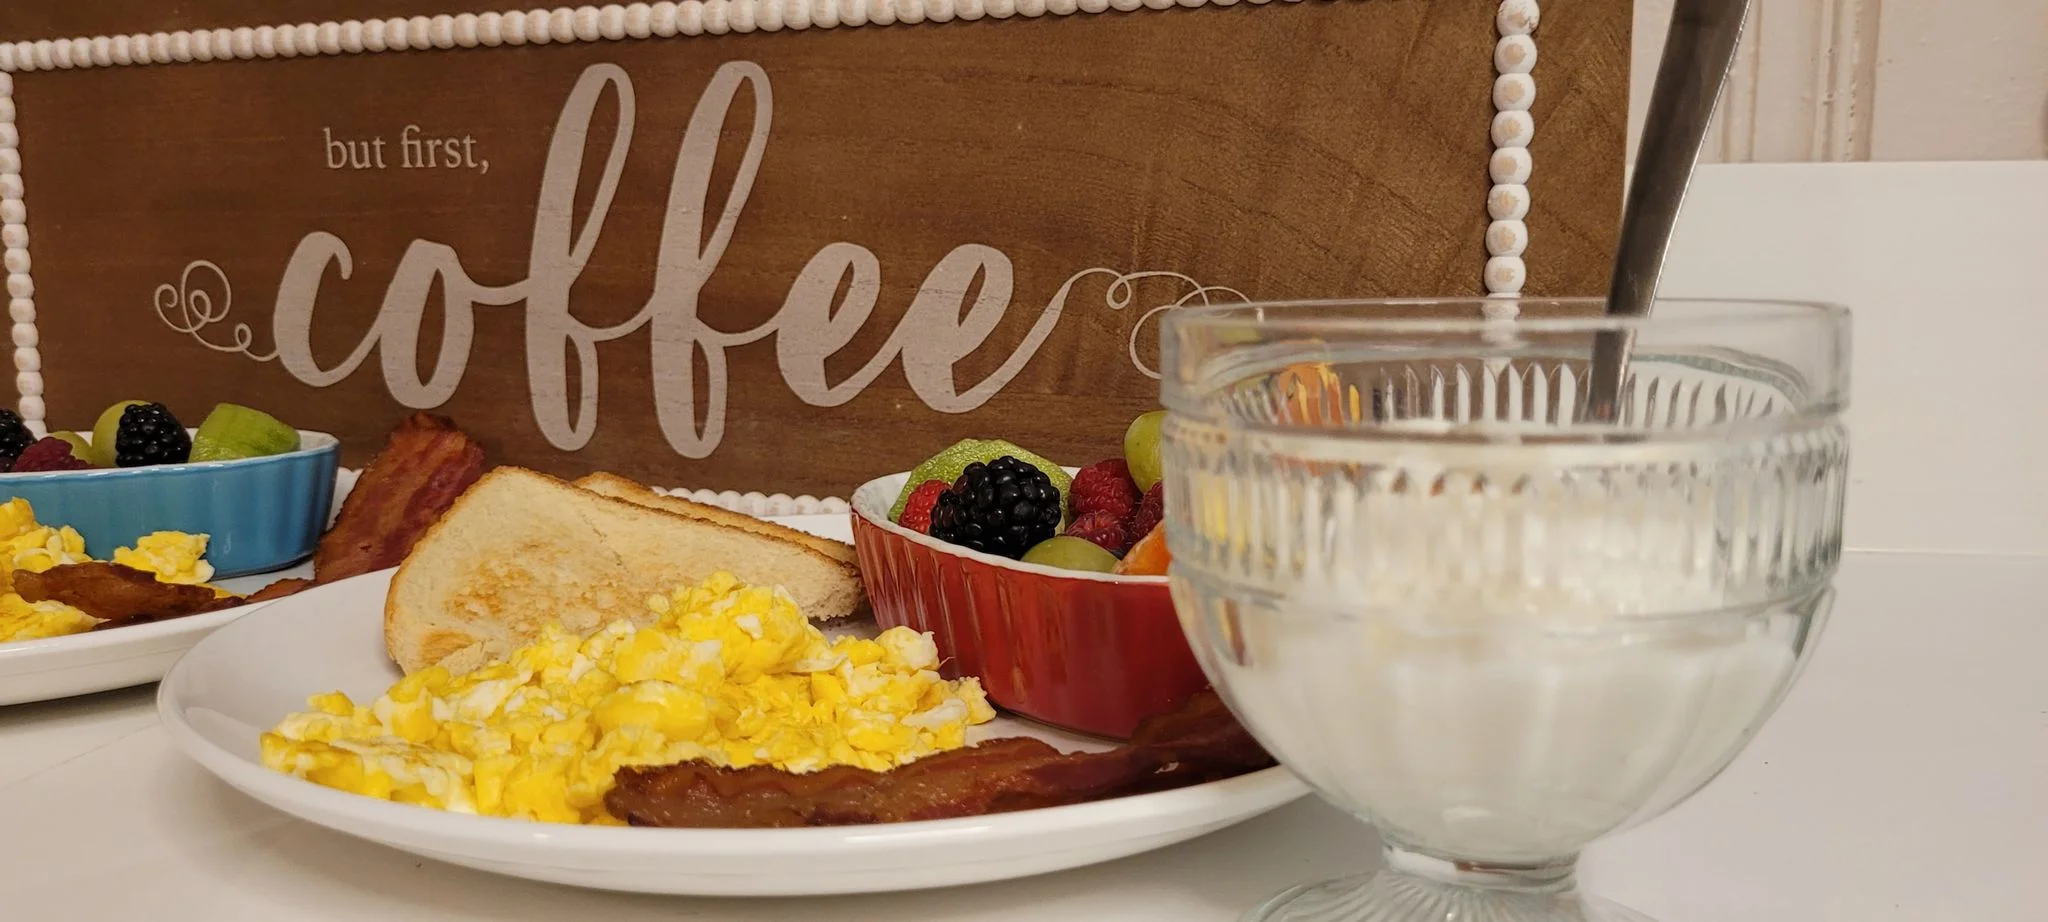 Coffee sign with milk and eggs and bacon and fruit